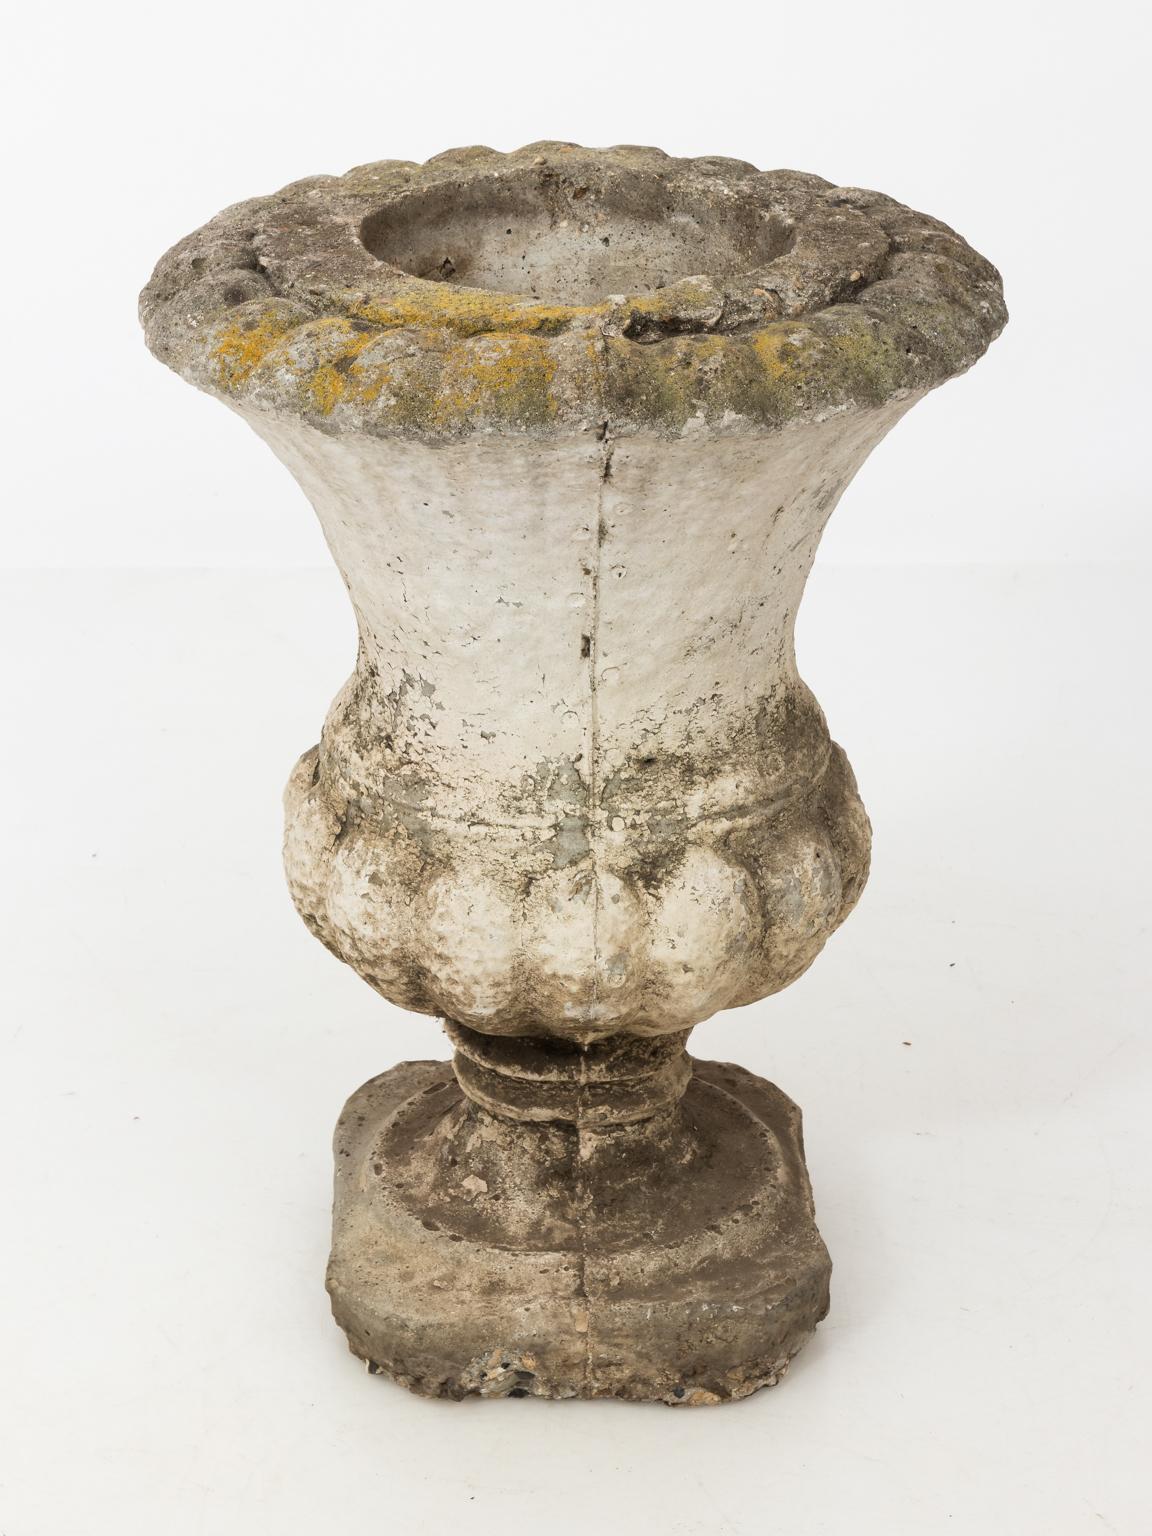 Cast stone ornamental garden urn with faux finish, circa 20th century. This piece weighs between 40 and 70 LBS.
 